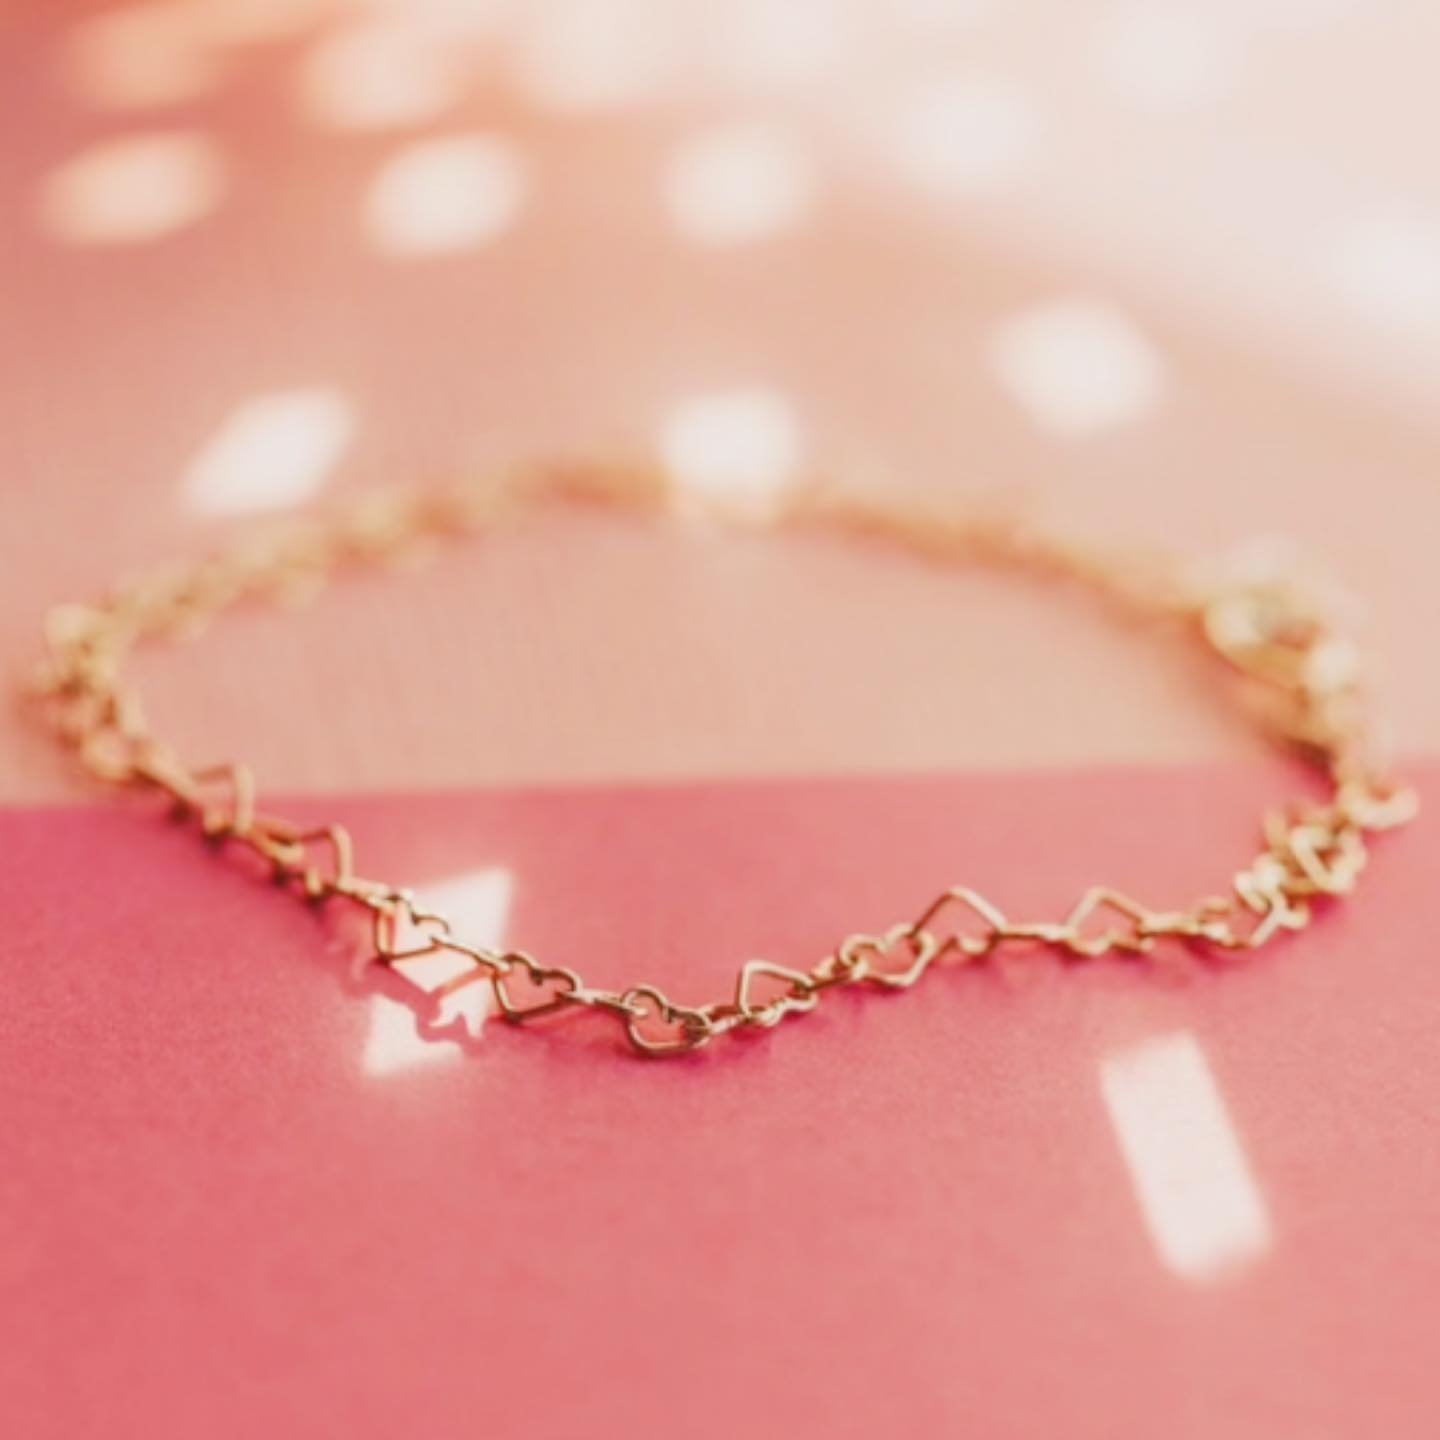 What better way to wrap up the Spring semester then by getting some permanent jewelry with your besties!! 🪩😏 

We're obsessing over @baublesandbobbies Bound&rsquo;s mini heart chain in Sterling Silver &amp; 14k Gold Filled 👏🏼

Use the link in our